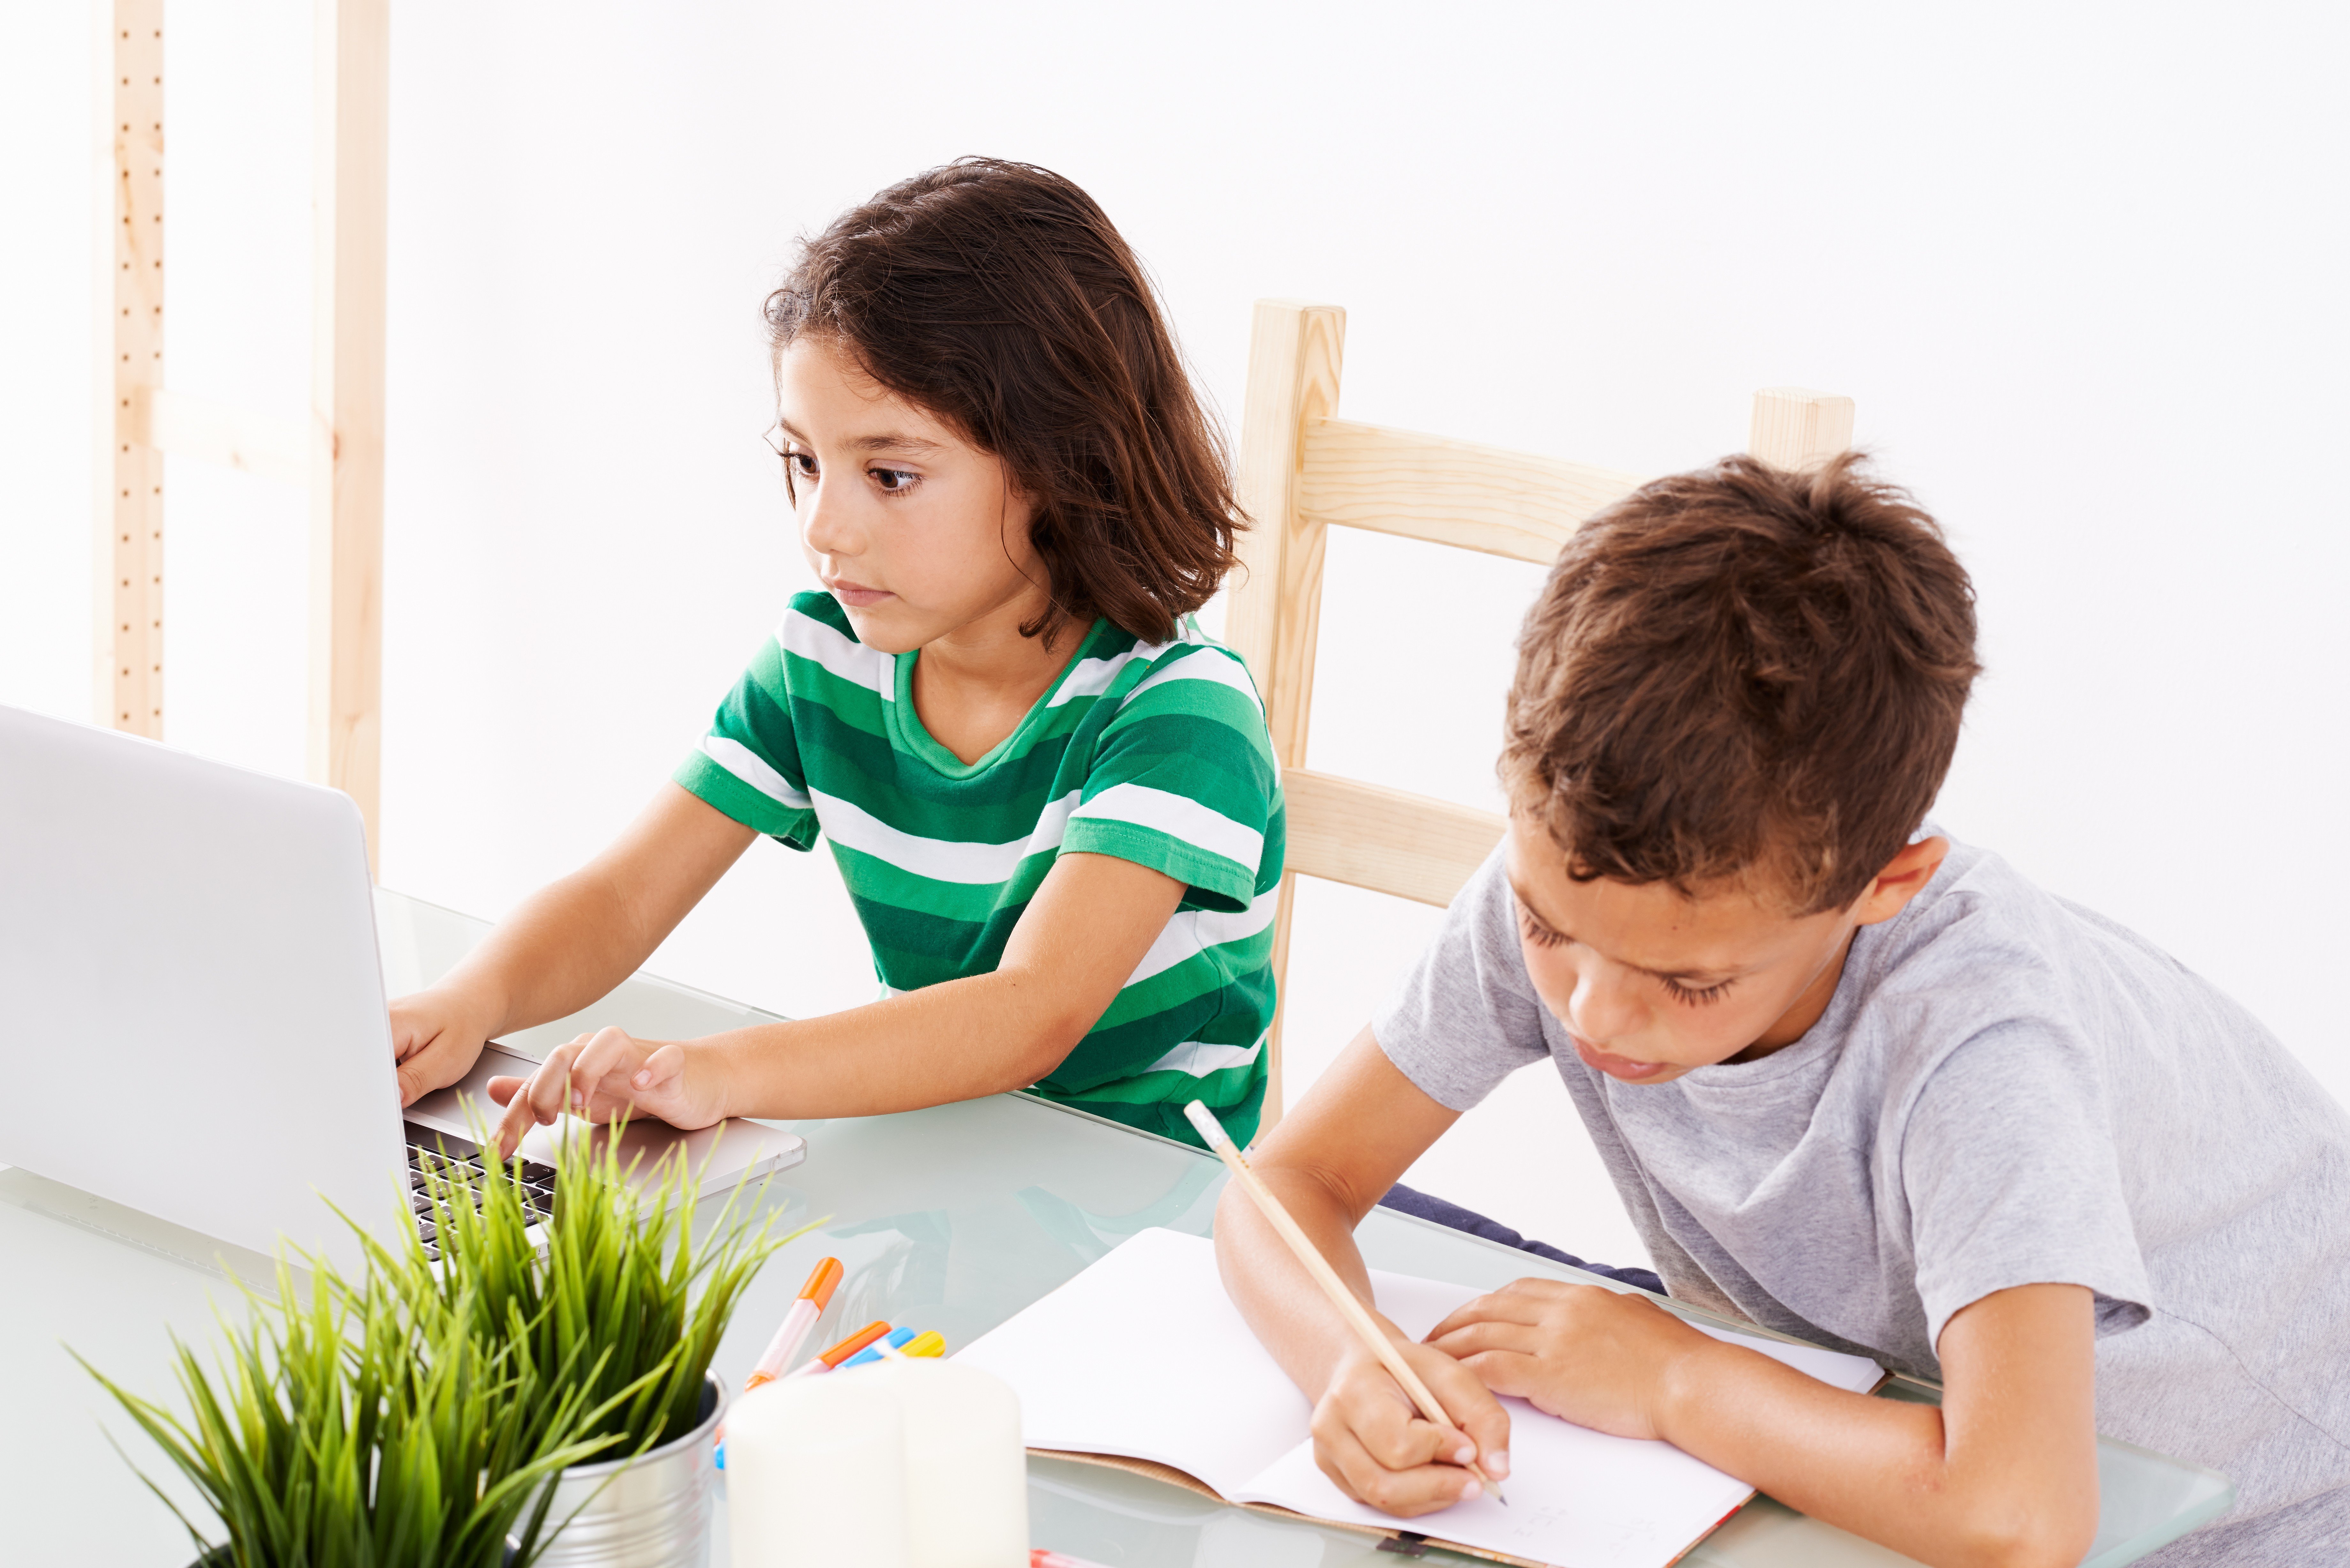 Children and teachers are learning to deal with working from home as the coronavirus causes school closures. Photo: Shutterstock